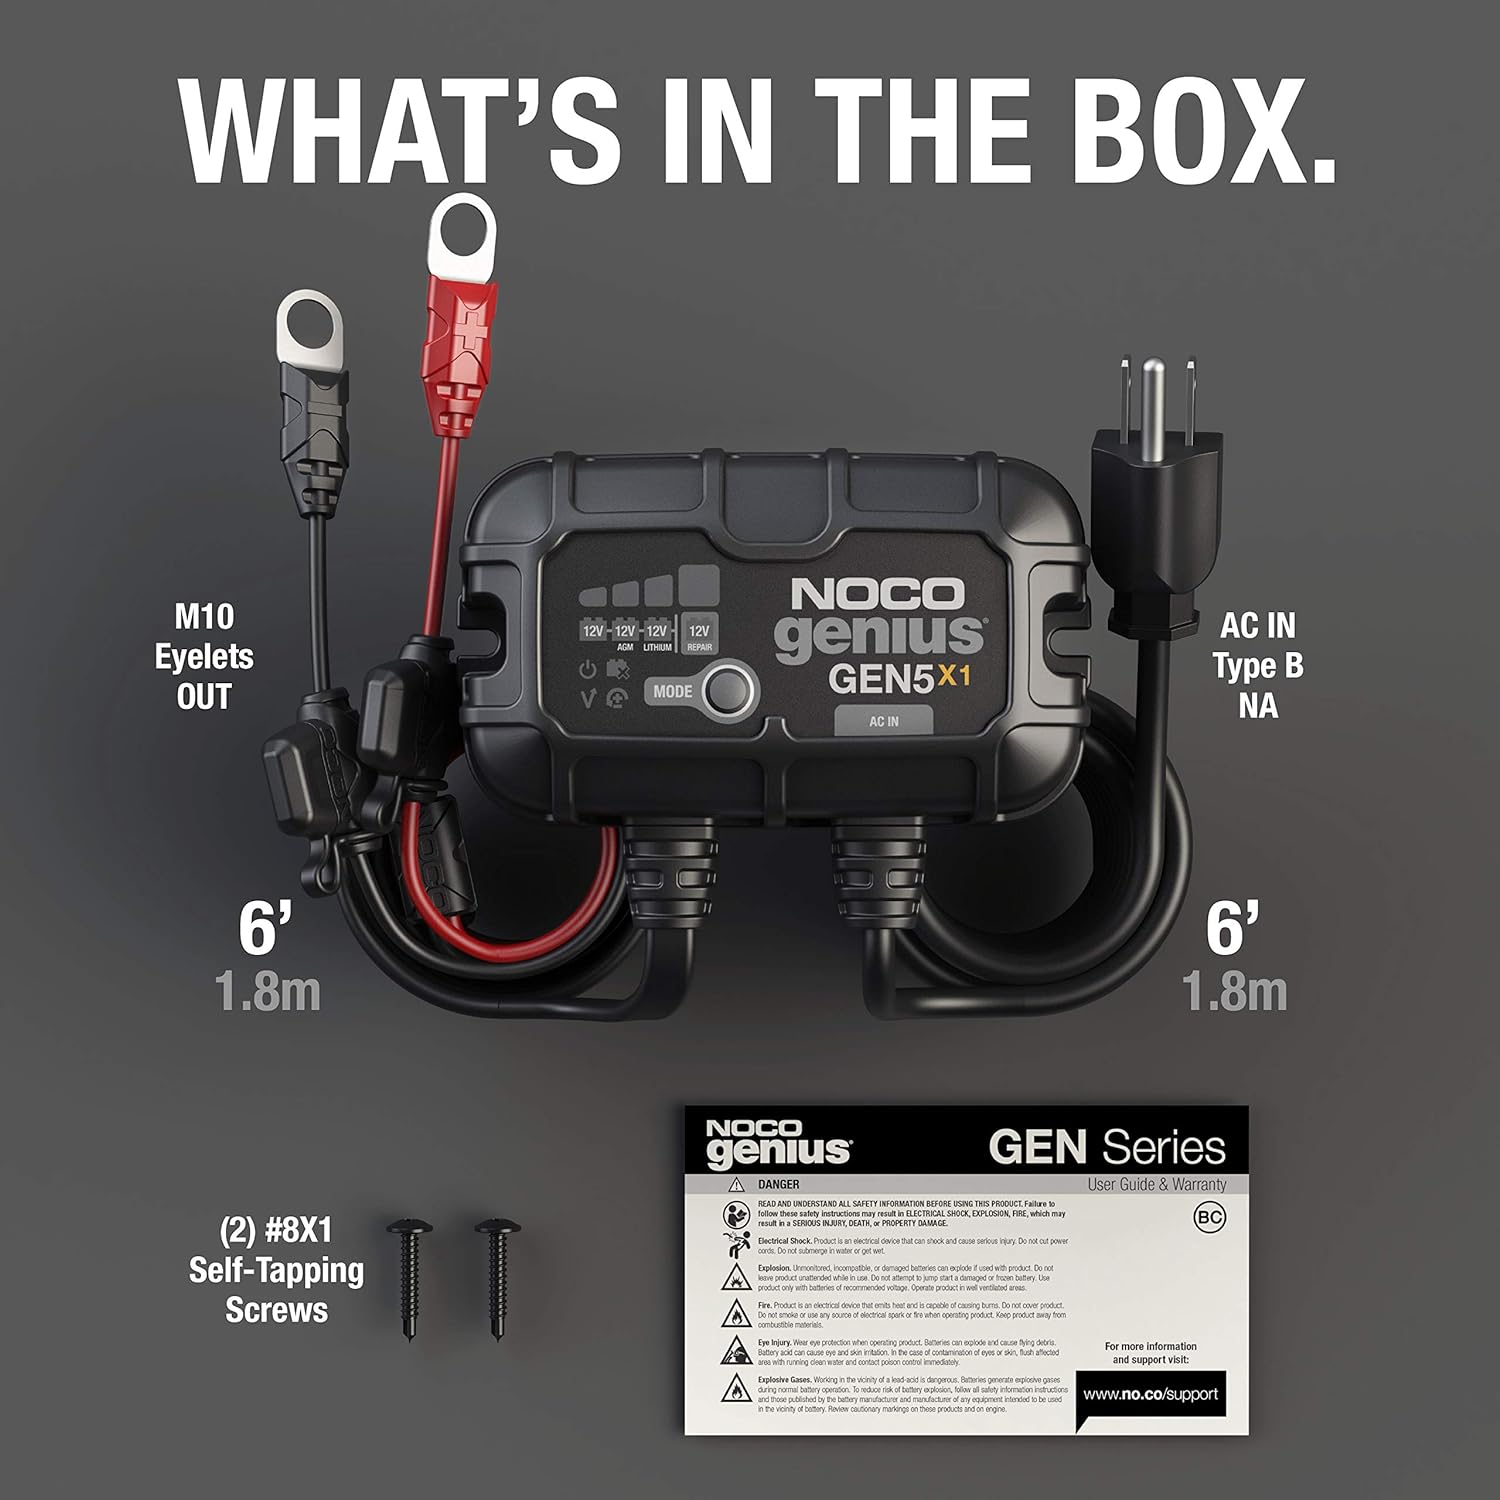 NOCO Genius GEN5X1, 1-Bank, 5A (5A/Bank) Smart Marine Battery Charger, 12V Waterproof Onboard Boat Charger, Maintainer and Desulfator for AGM, Lithium (LiFePO4) and Deep-Cycle Batteries - NOCO Genius GEN5X1 Battery Charger Review